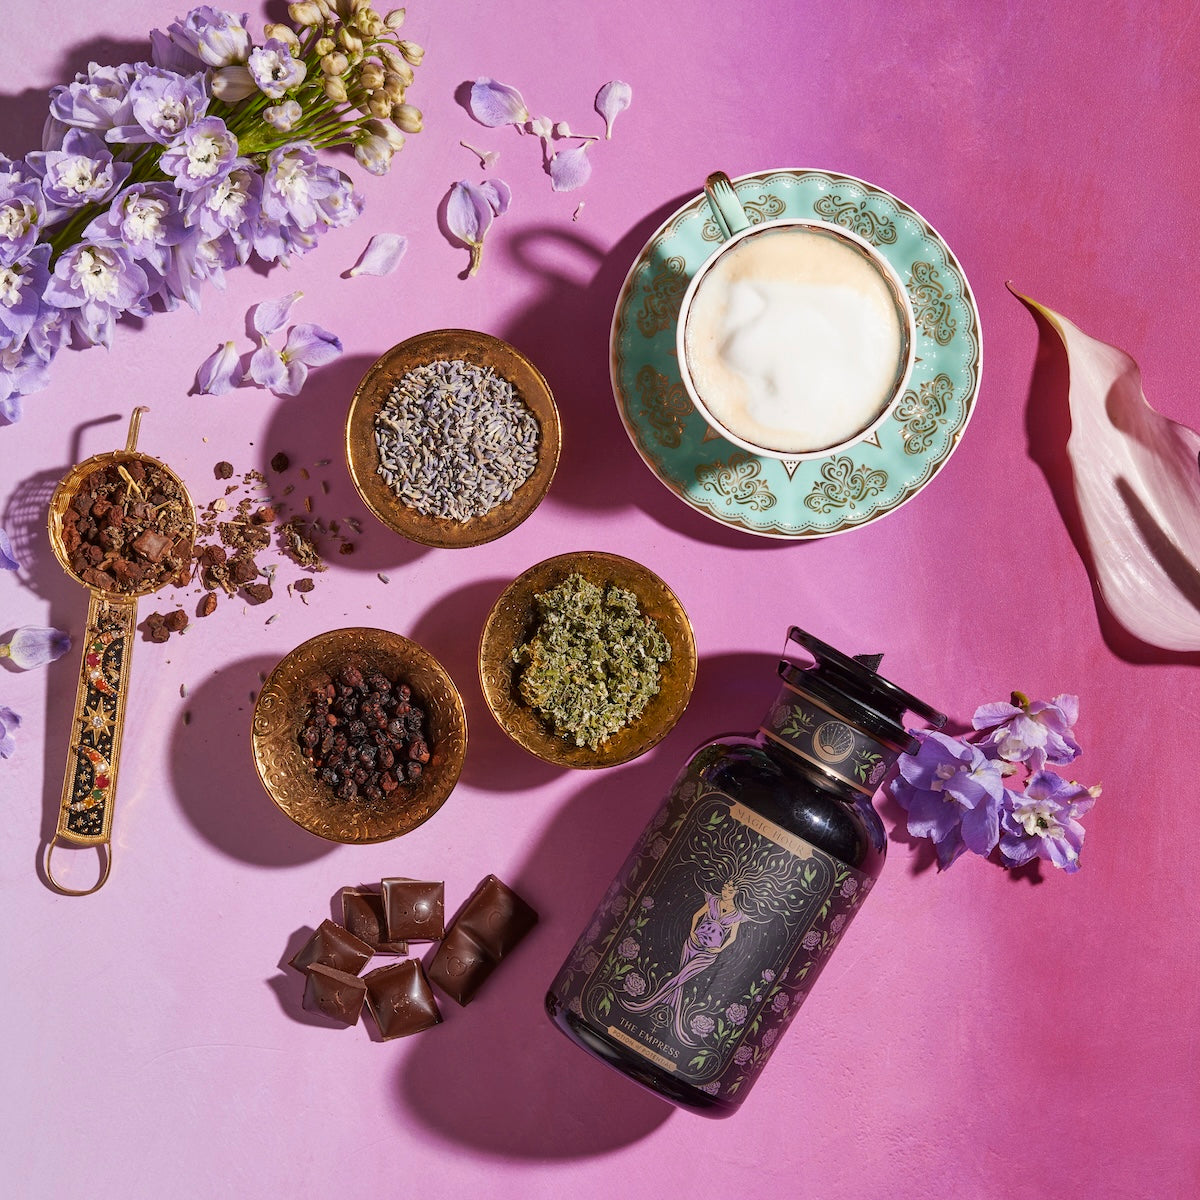 A flat lay of The Empress: Lavender Currant Shatavari Cocoa Tea of Nurturing Creativity by Magic Hour in an ornate cup and saucer, surrounded by dried flowers, organic herbs, chocolate pieces, and a decorative jar on a pink and purple gradient background. A sprig of fresh purple flowers and a white calla lily are also in the scene.